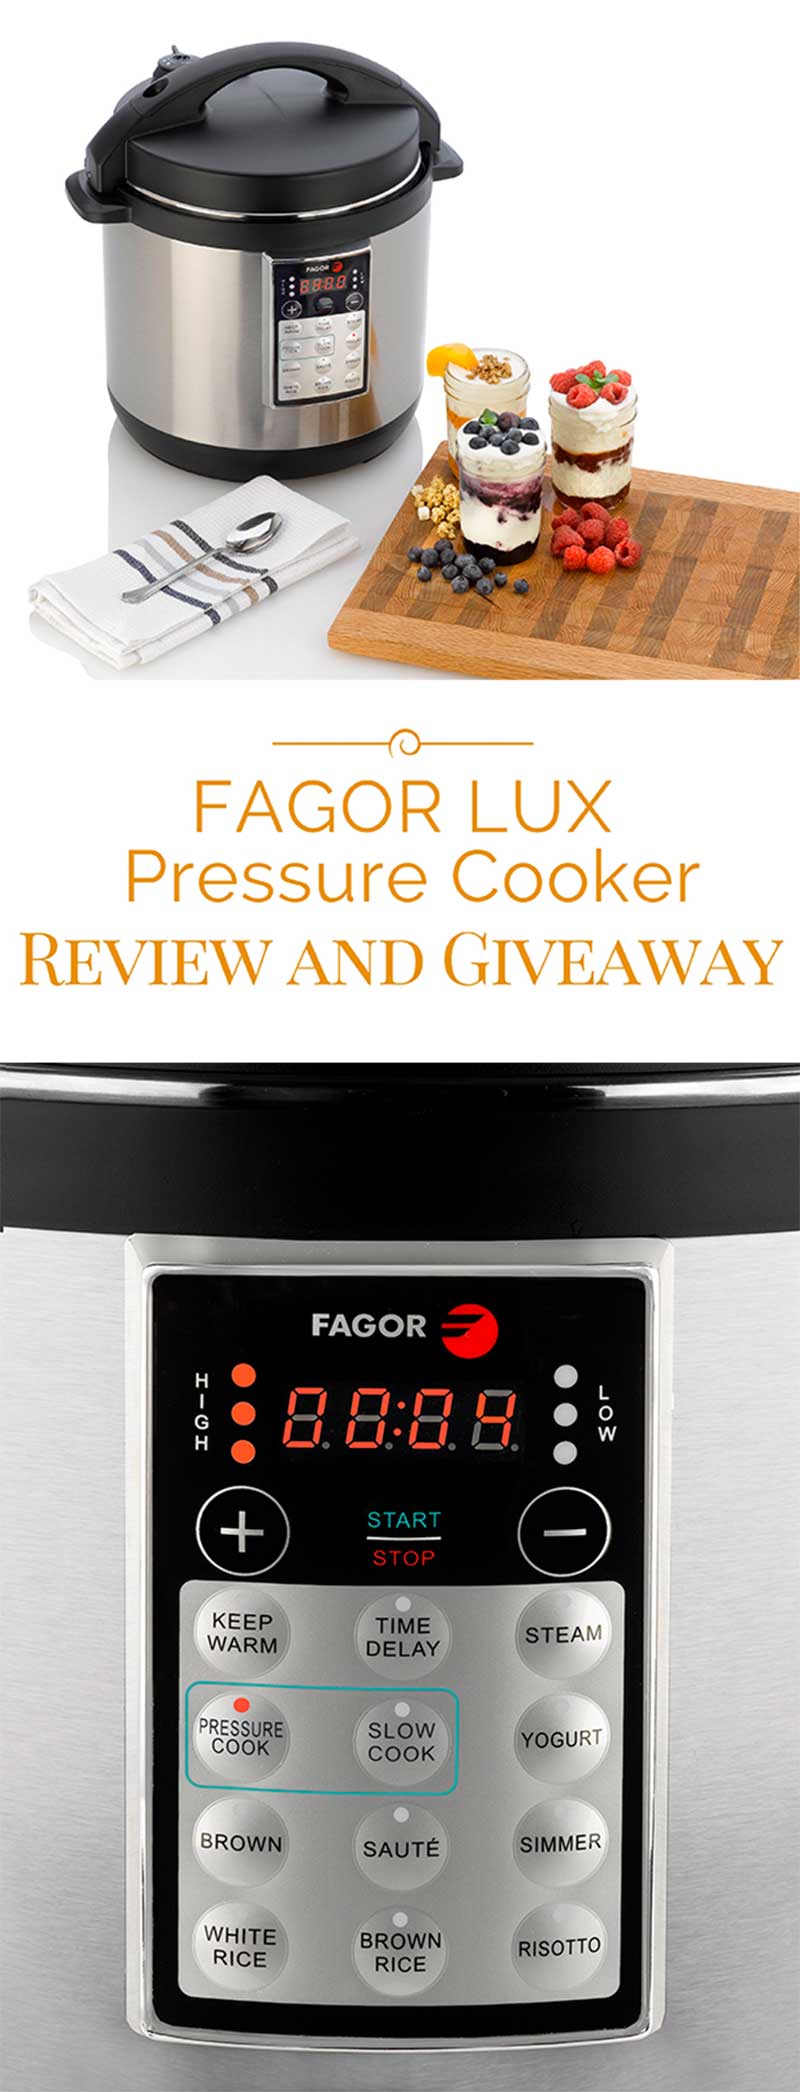 Top Rated Fagor LUX 8 Quart Multi-Cooker